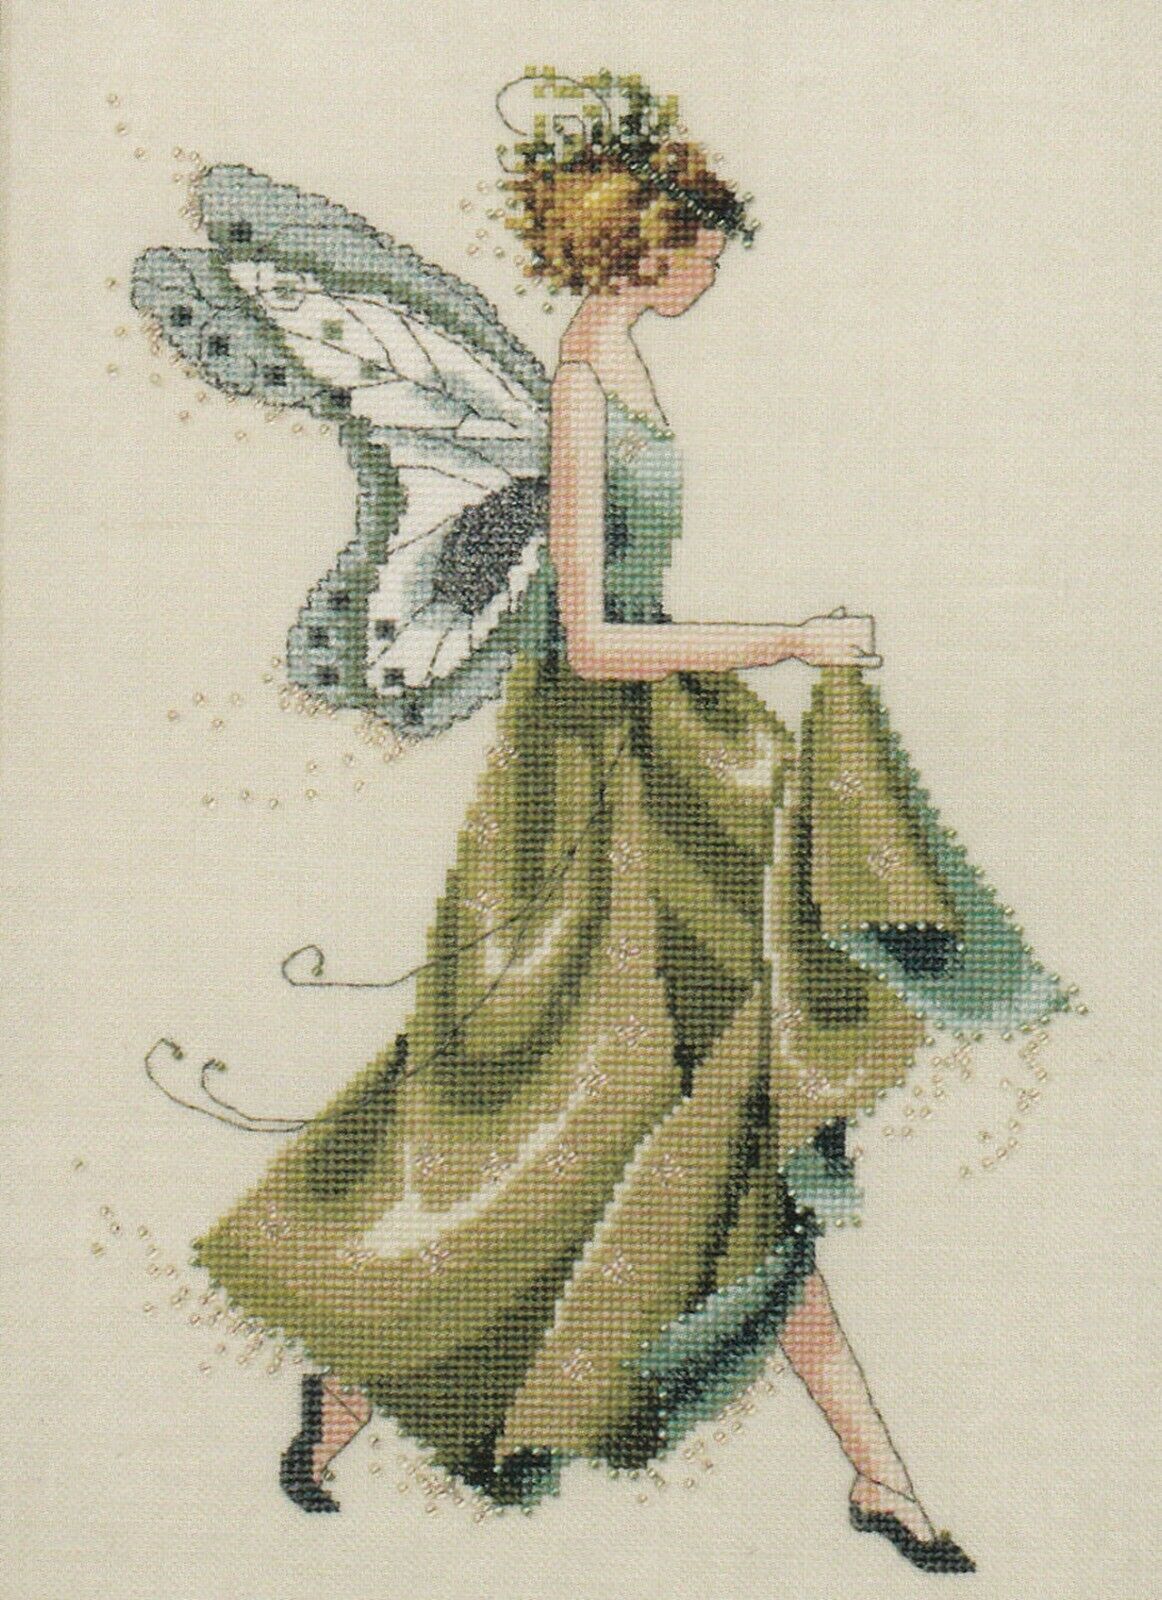 Primary image for SALE! Complete Xstitch Material - IVY NC108 - by Nora Corbett